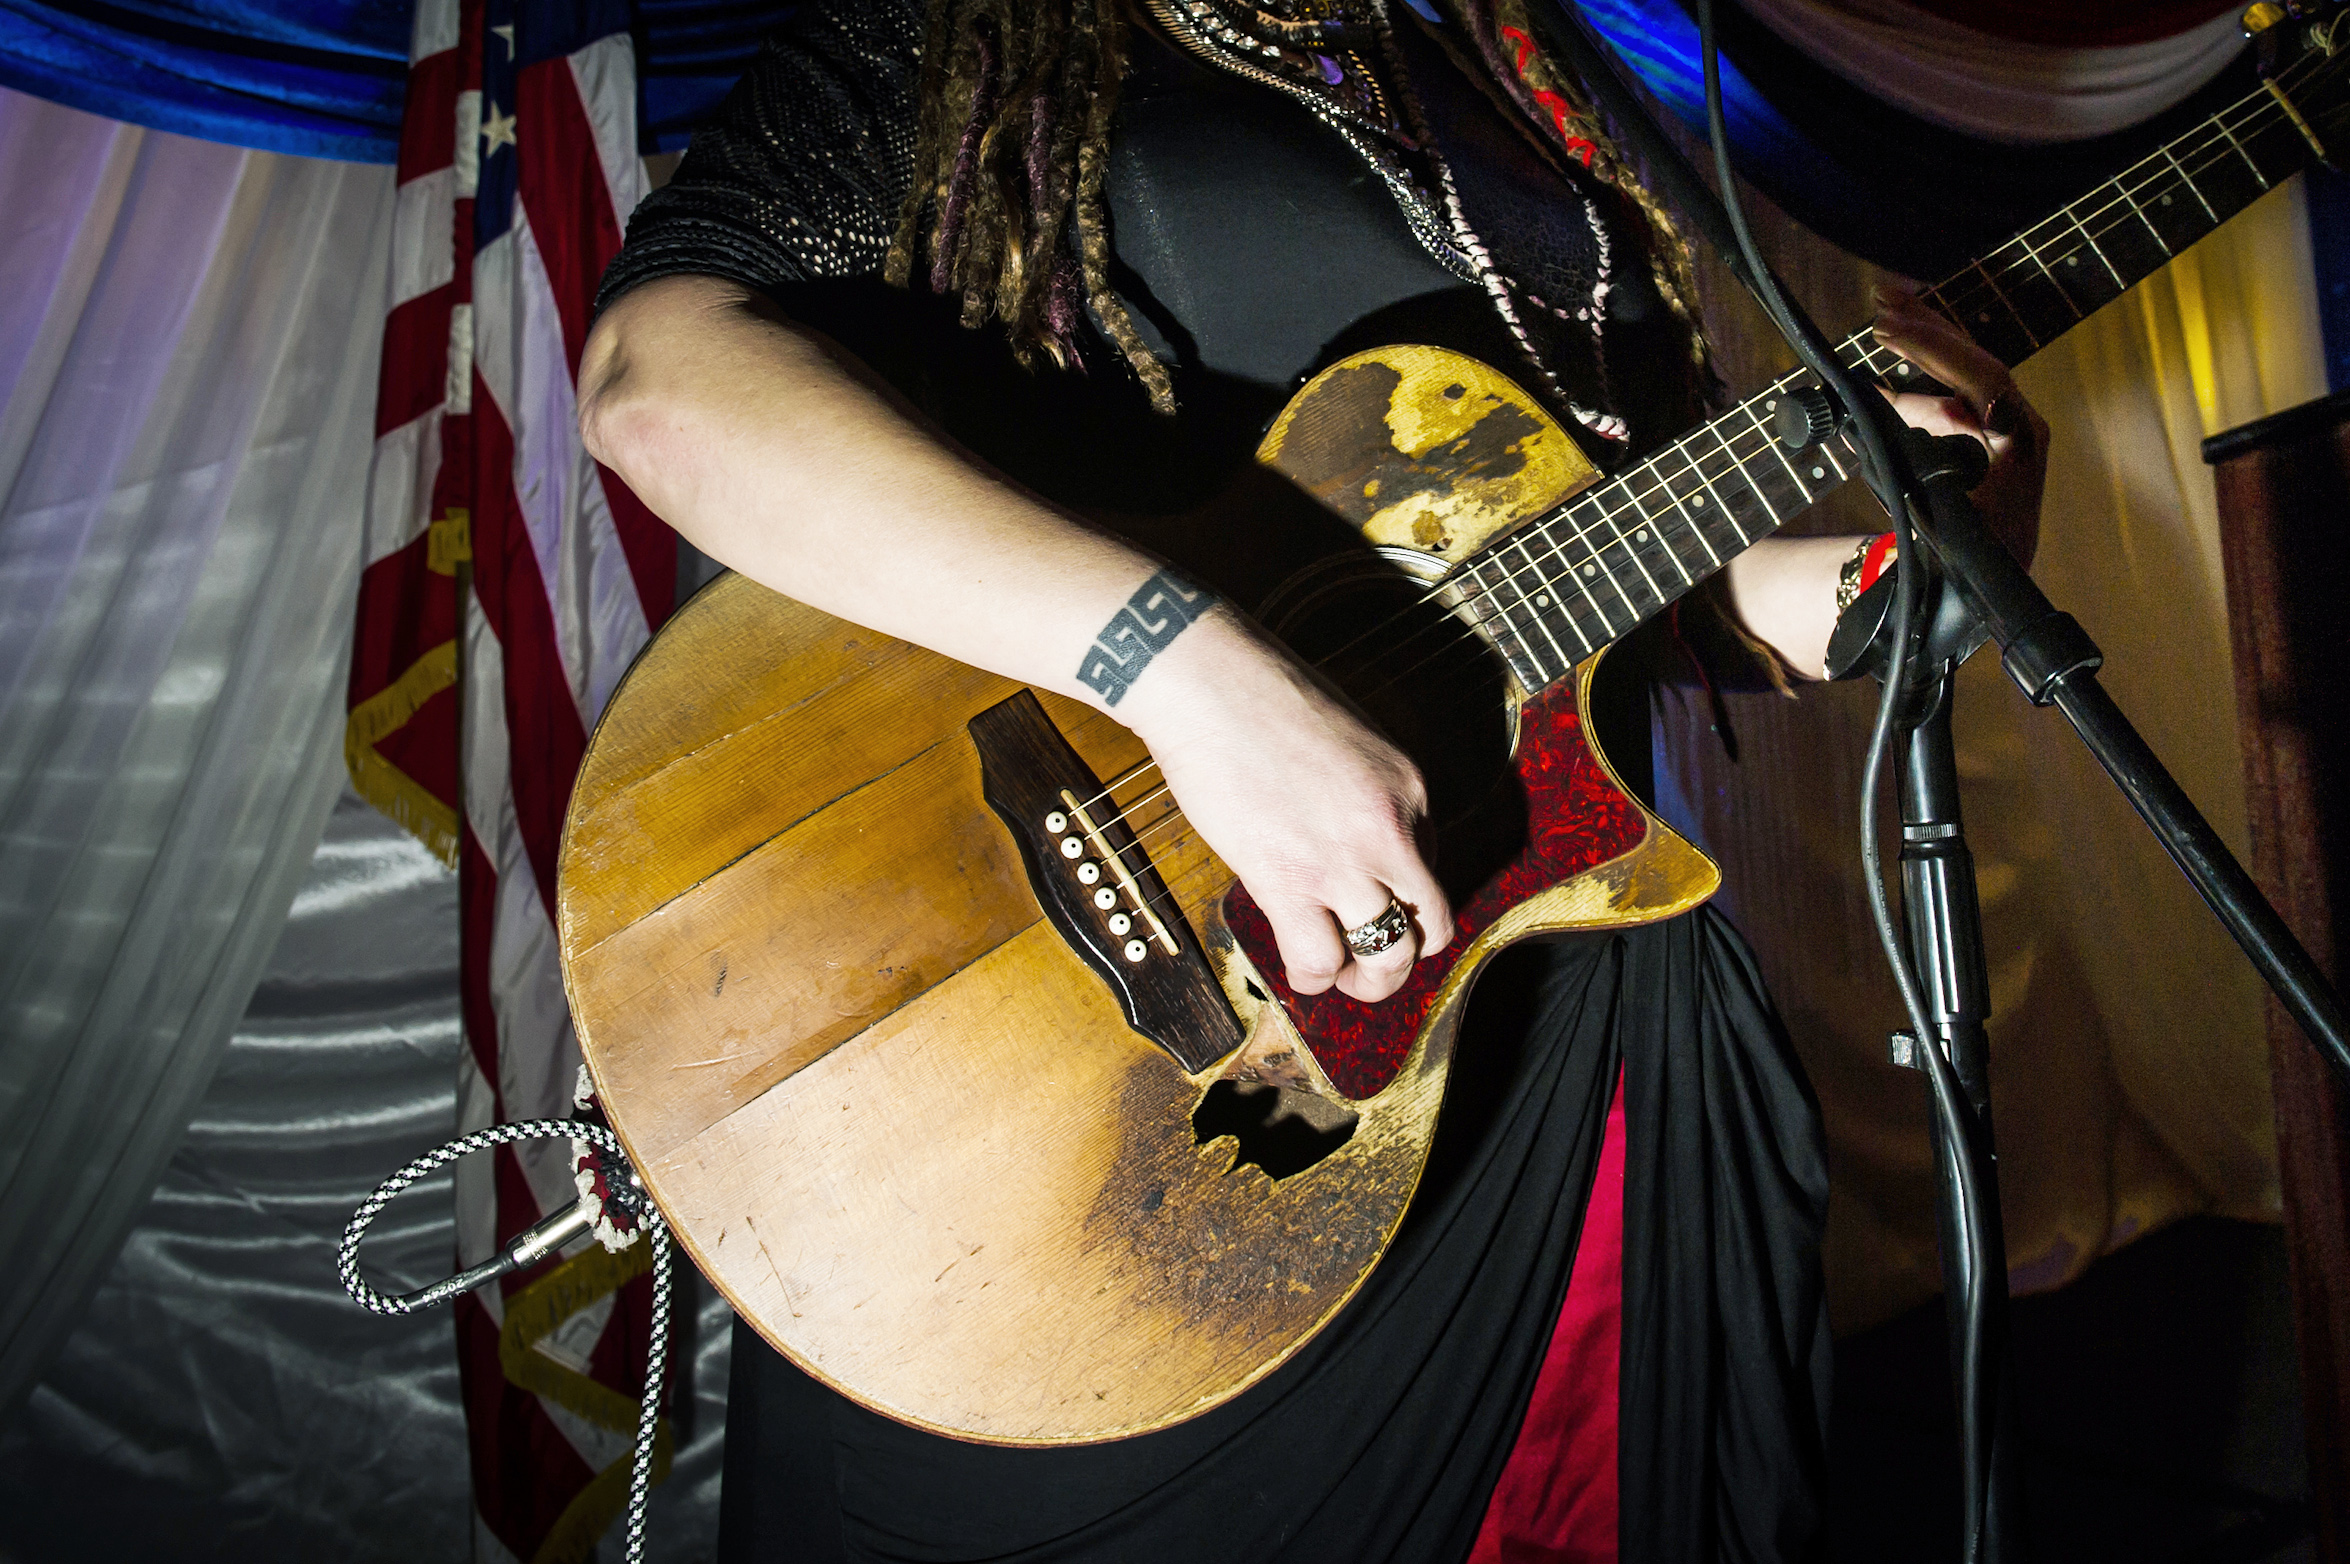 Sista Otis performs at the Inaugural Deploraball hosted by Gays for Trump at the Bolger Center in Potomac, Maryland on January 20, 2017.